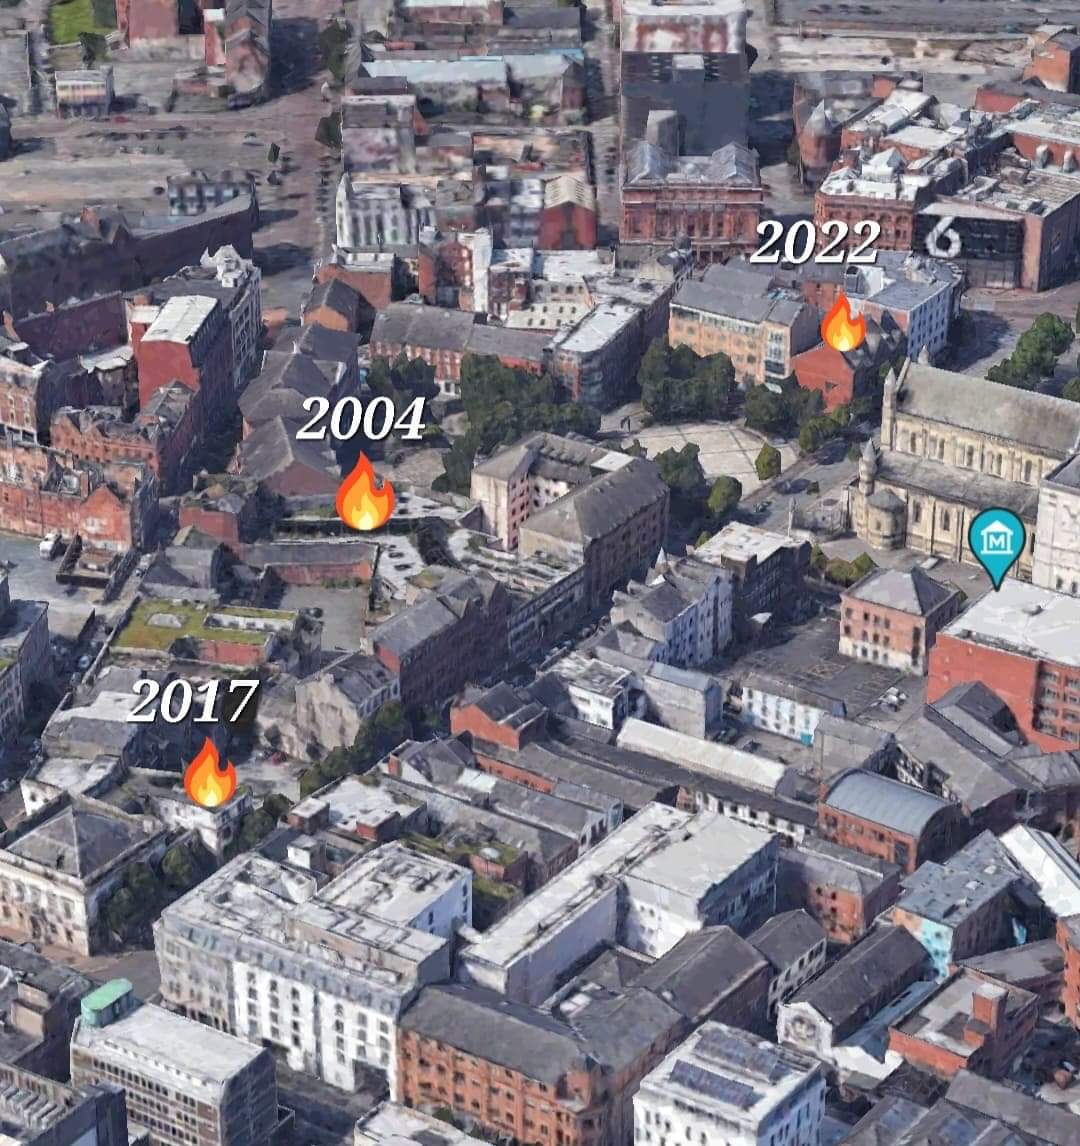 One Cathedral Quarter street, three major fires: 17 April 2004 - North Street Arcade 17 November 2017 - Exchange Place 3 October 2022 - Cathedral Buildings How many more?...